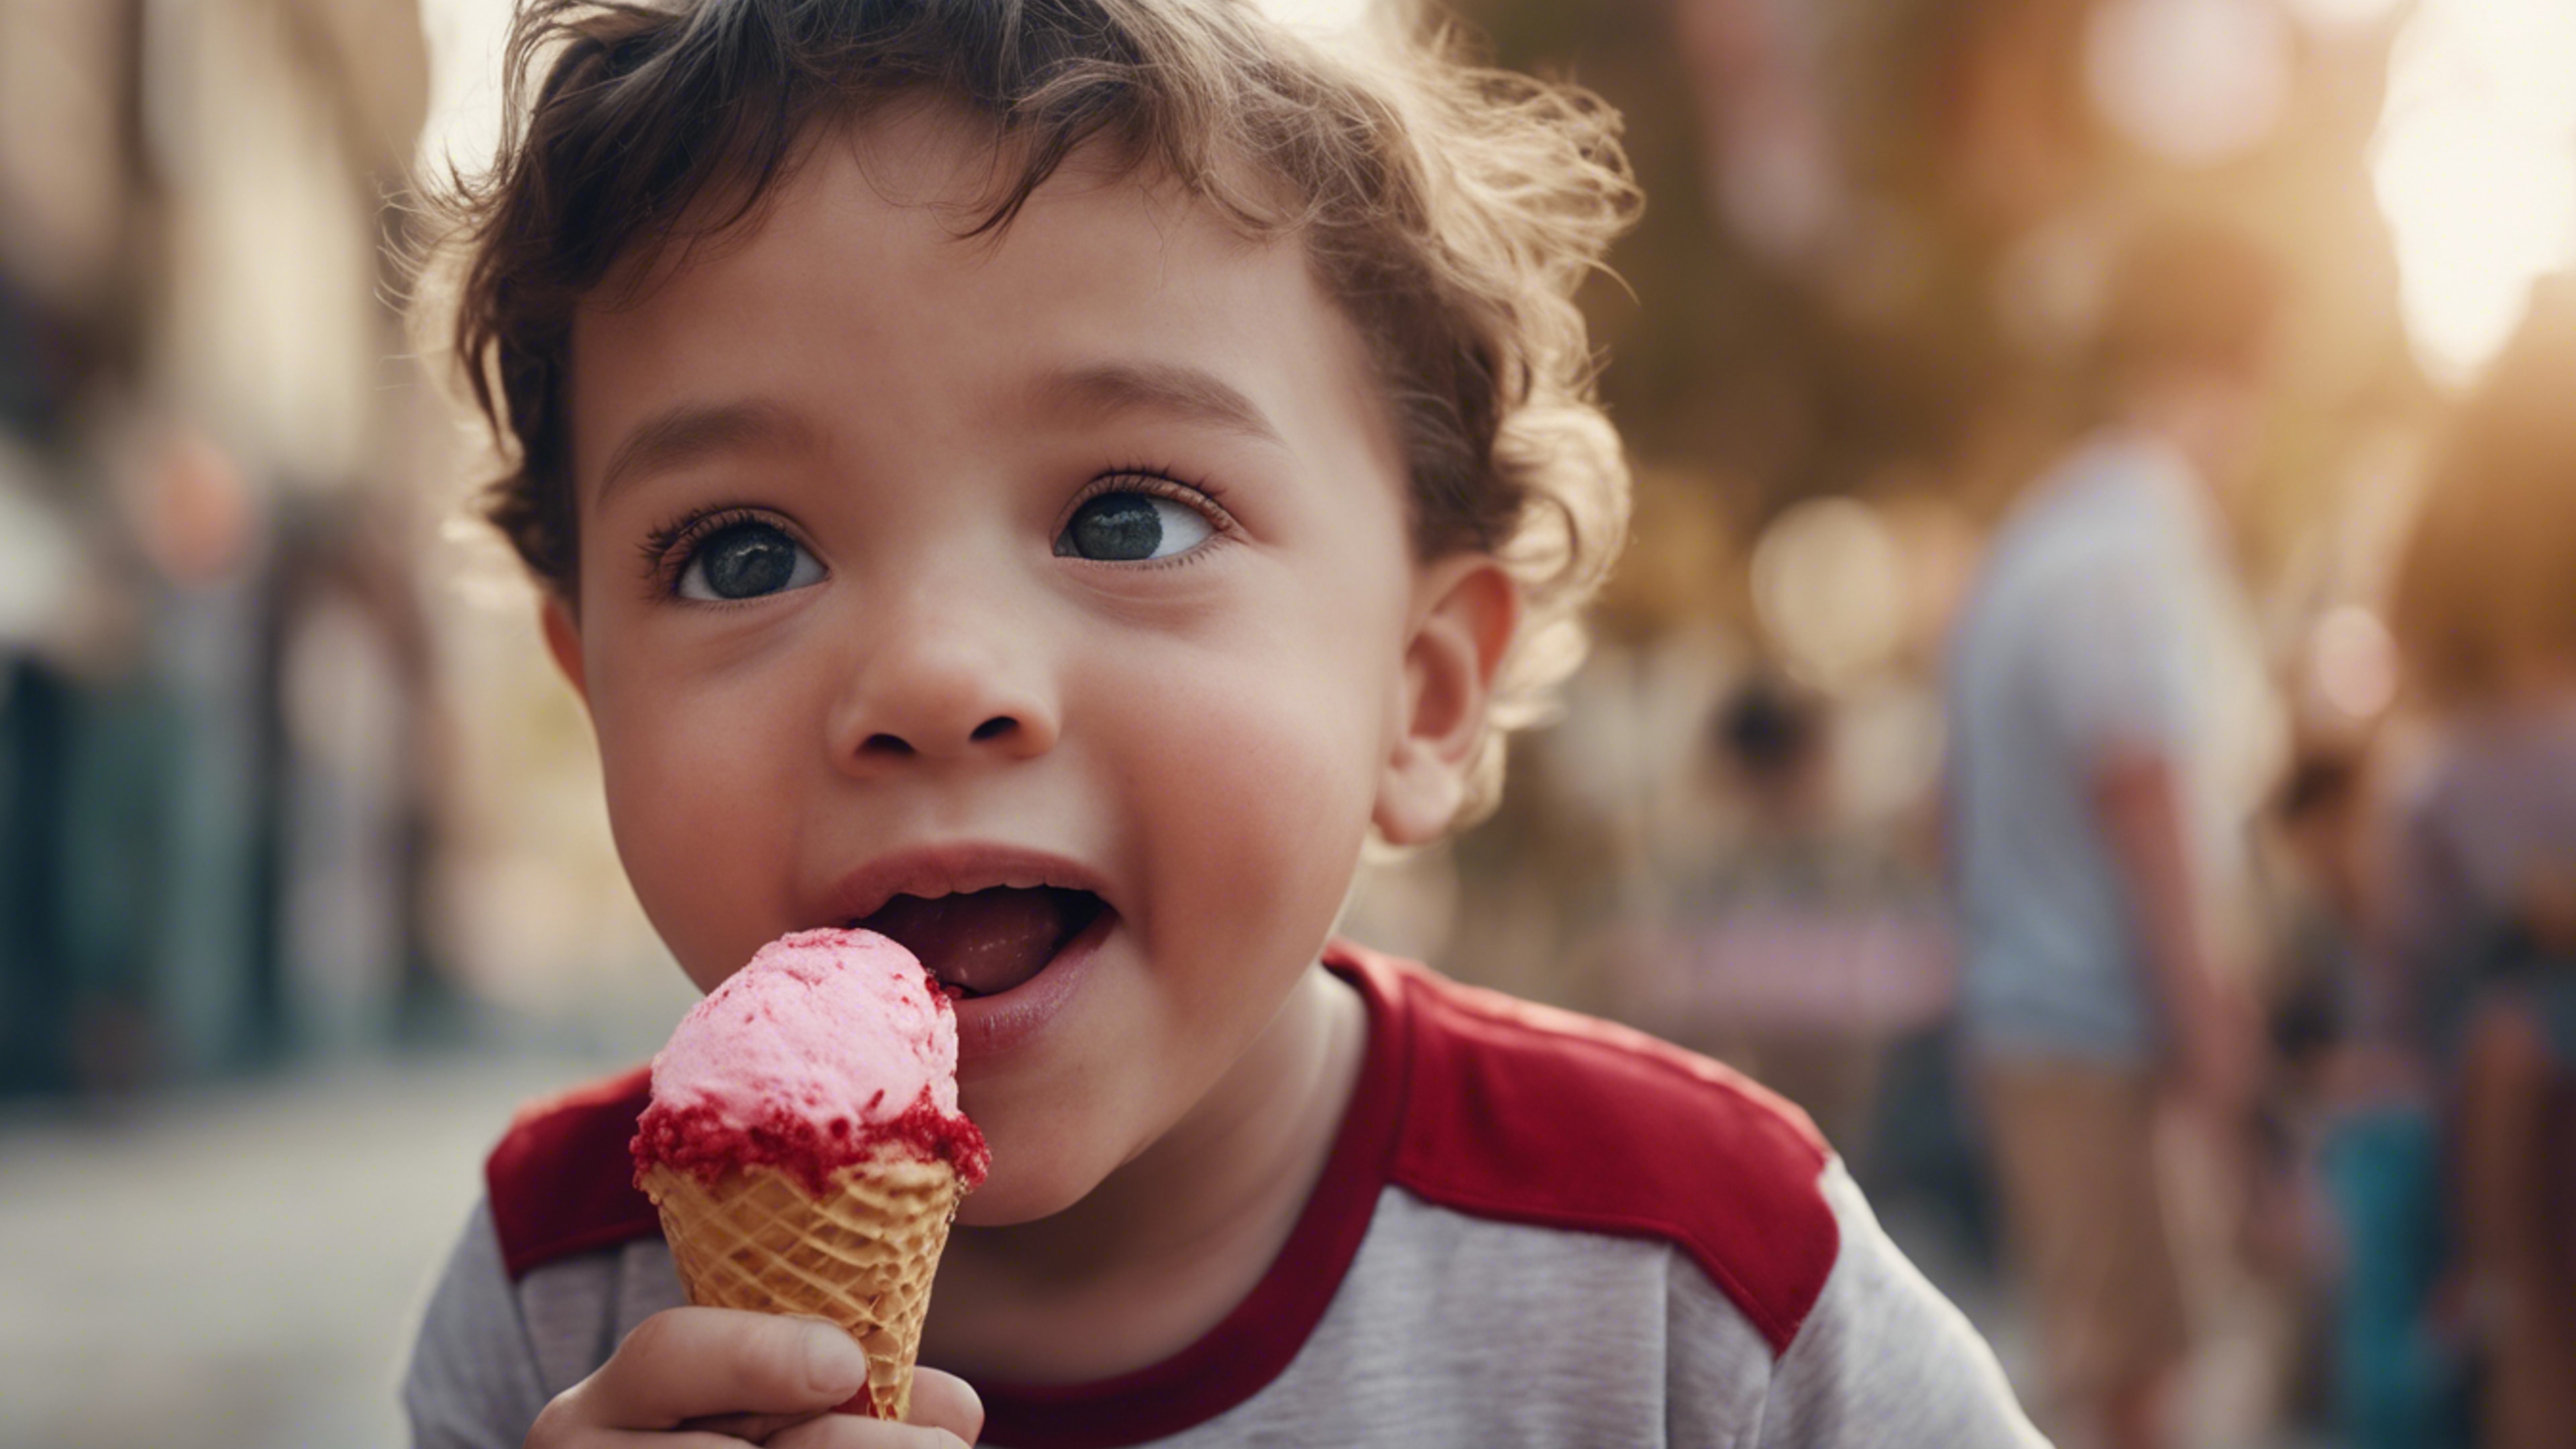 A small child delighting in a red velvet ice cream cone, with a wide-eyed expression of joy on his face. Wallpaper[7a3fbd1e60614c42931f]